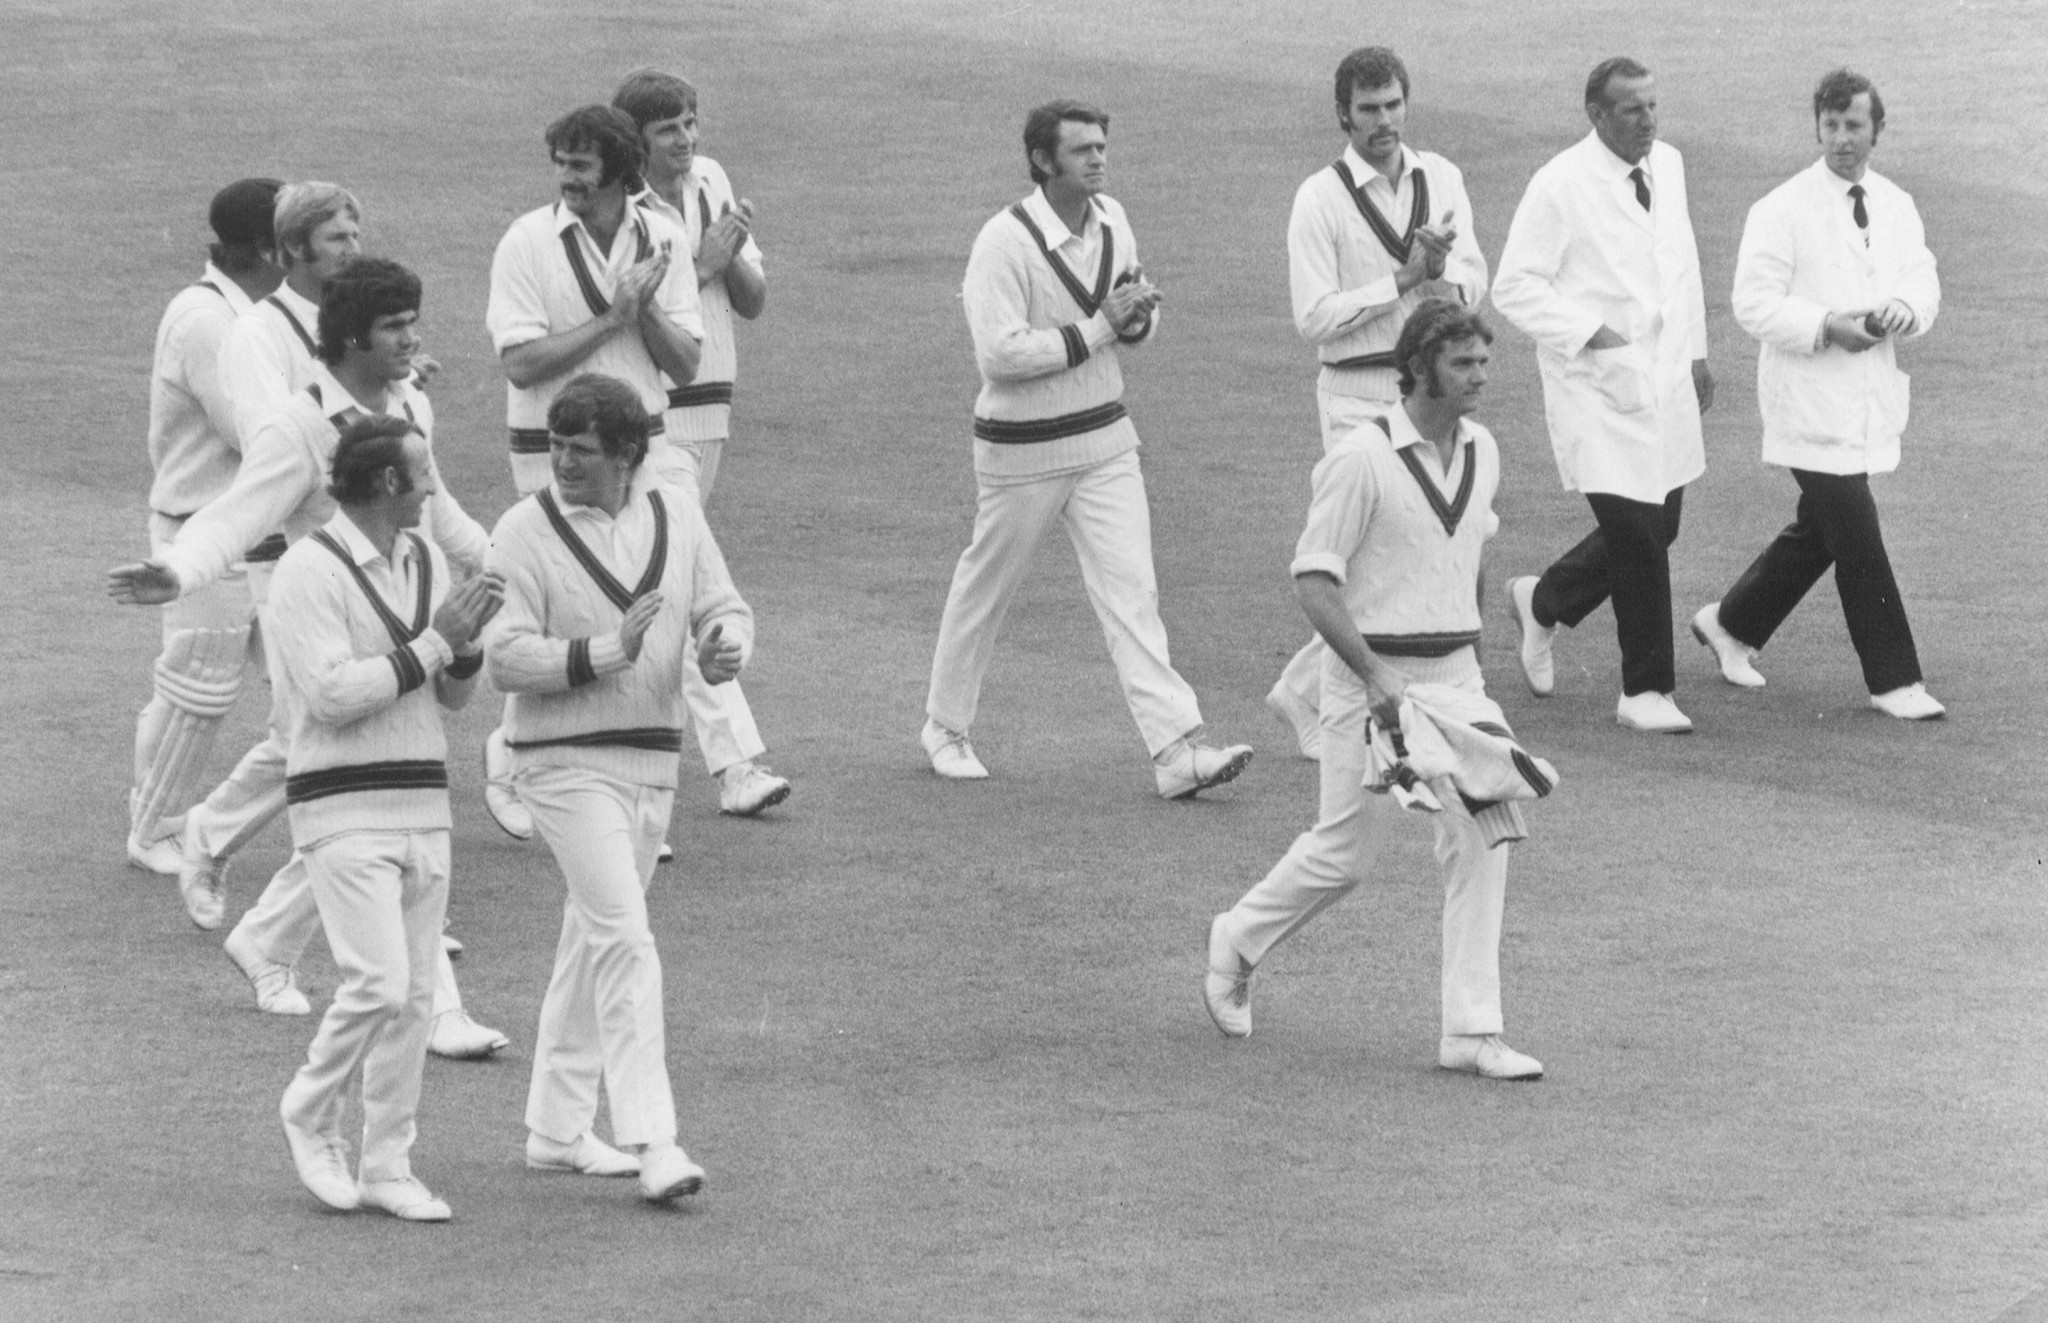 Bob Massie, right front, leads the Australian team in after taking 16 wickets for 137 in his Test match debut 50 years ago this week ©Getty Images